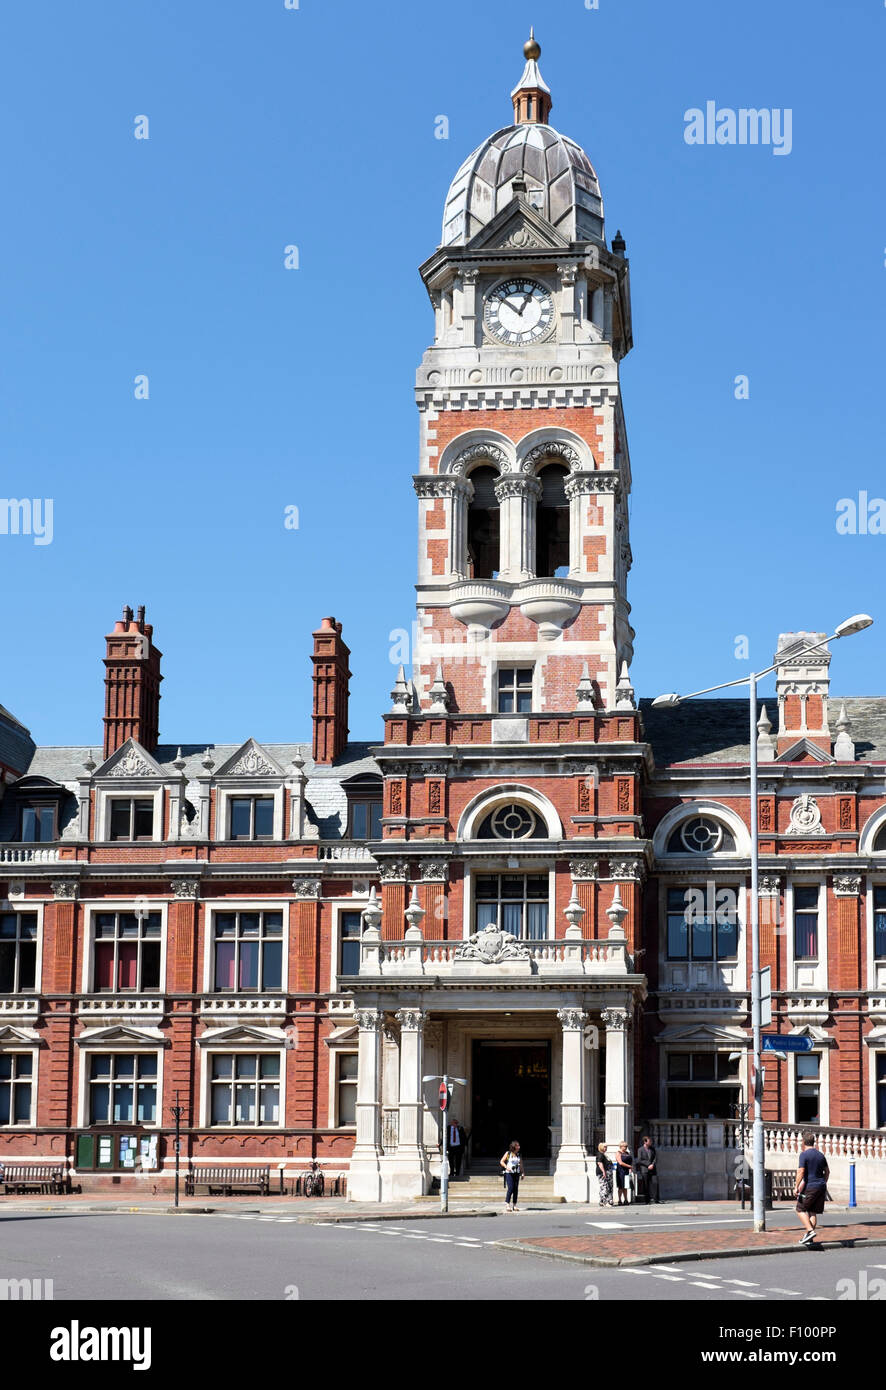 Eastbourne Town Hall, Eastbourne, East Sussex, England, UK Stockfoto